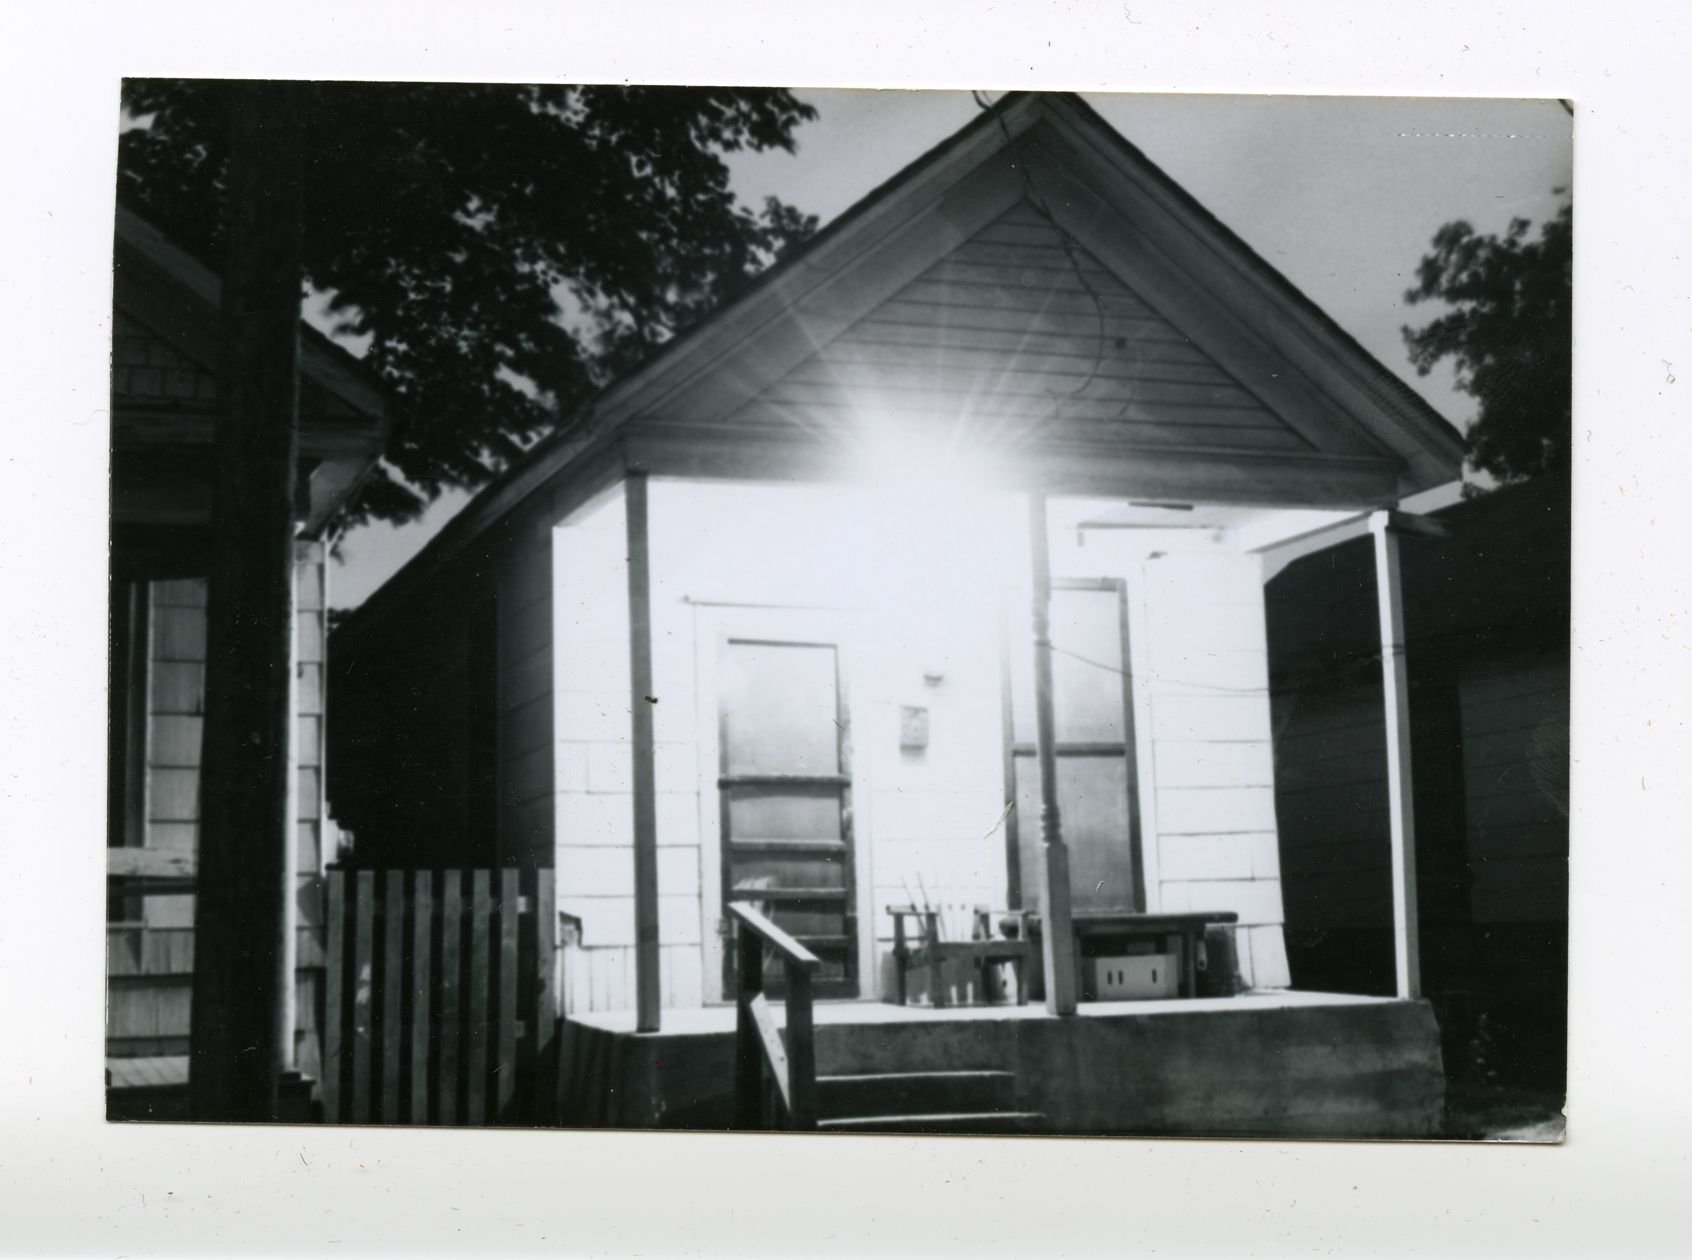 Bungalow with a bright porch light in Freedmen's Town